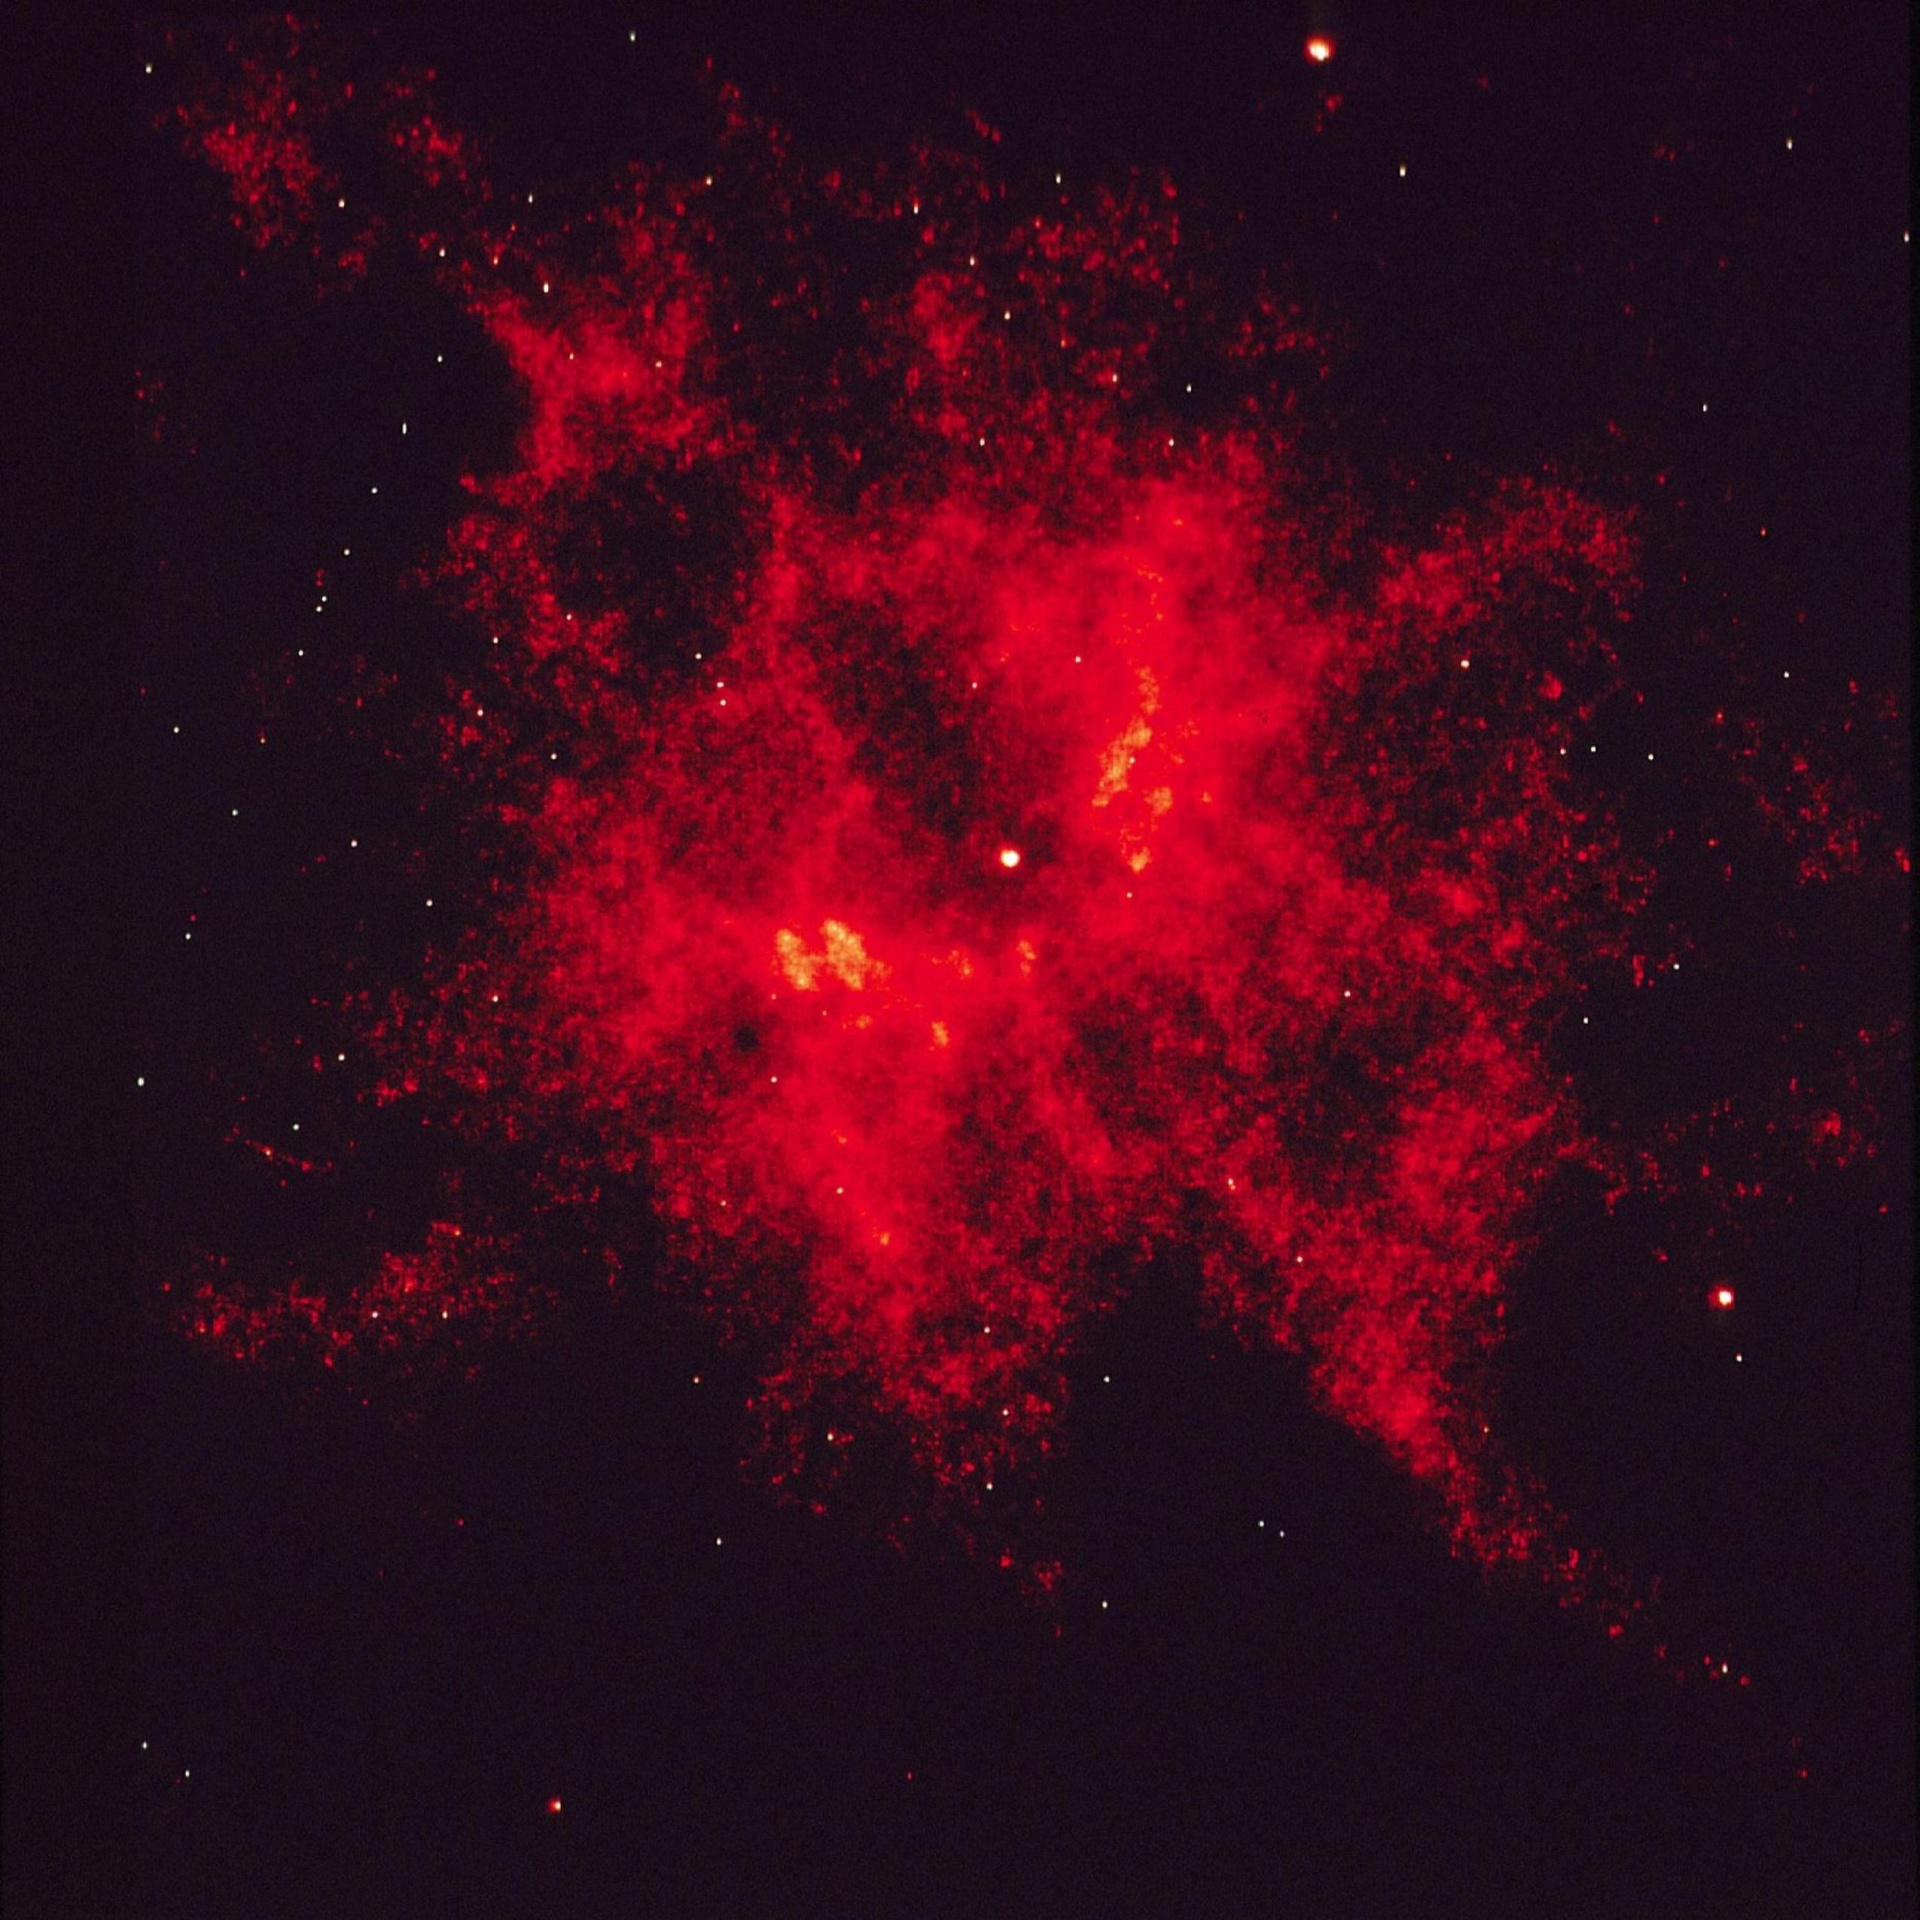 This photo presents the first clear view of one of the hottest known stars, the central star of nebula NGC 2440 in our Milky Way galaxy. The superhot star, called the NGC 2440 nucleus is the bright white dot in the center of this photograph.